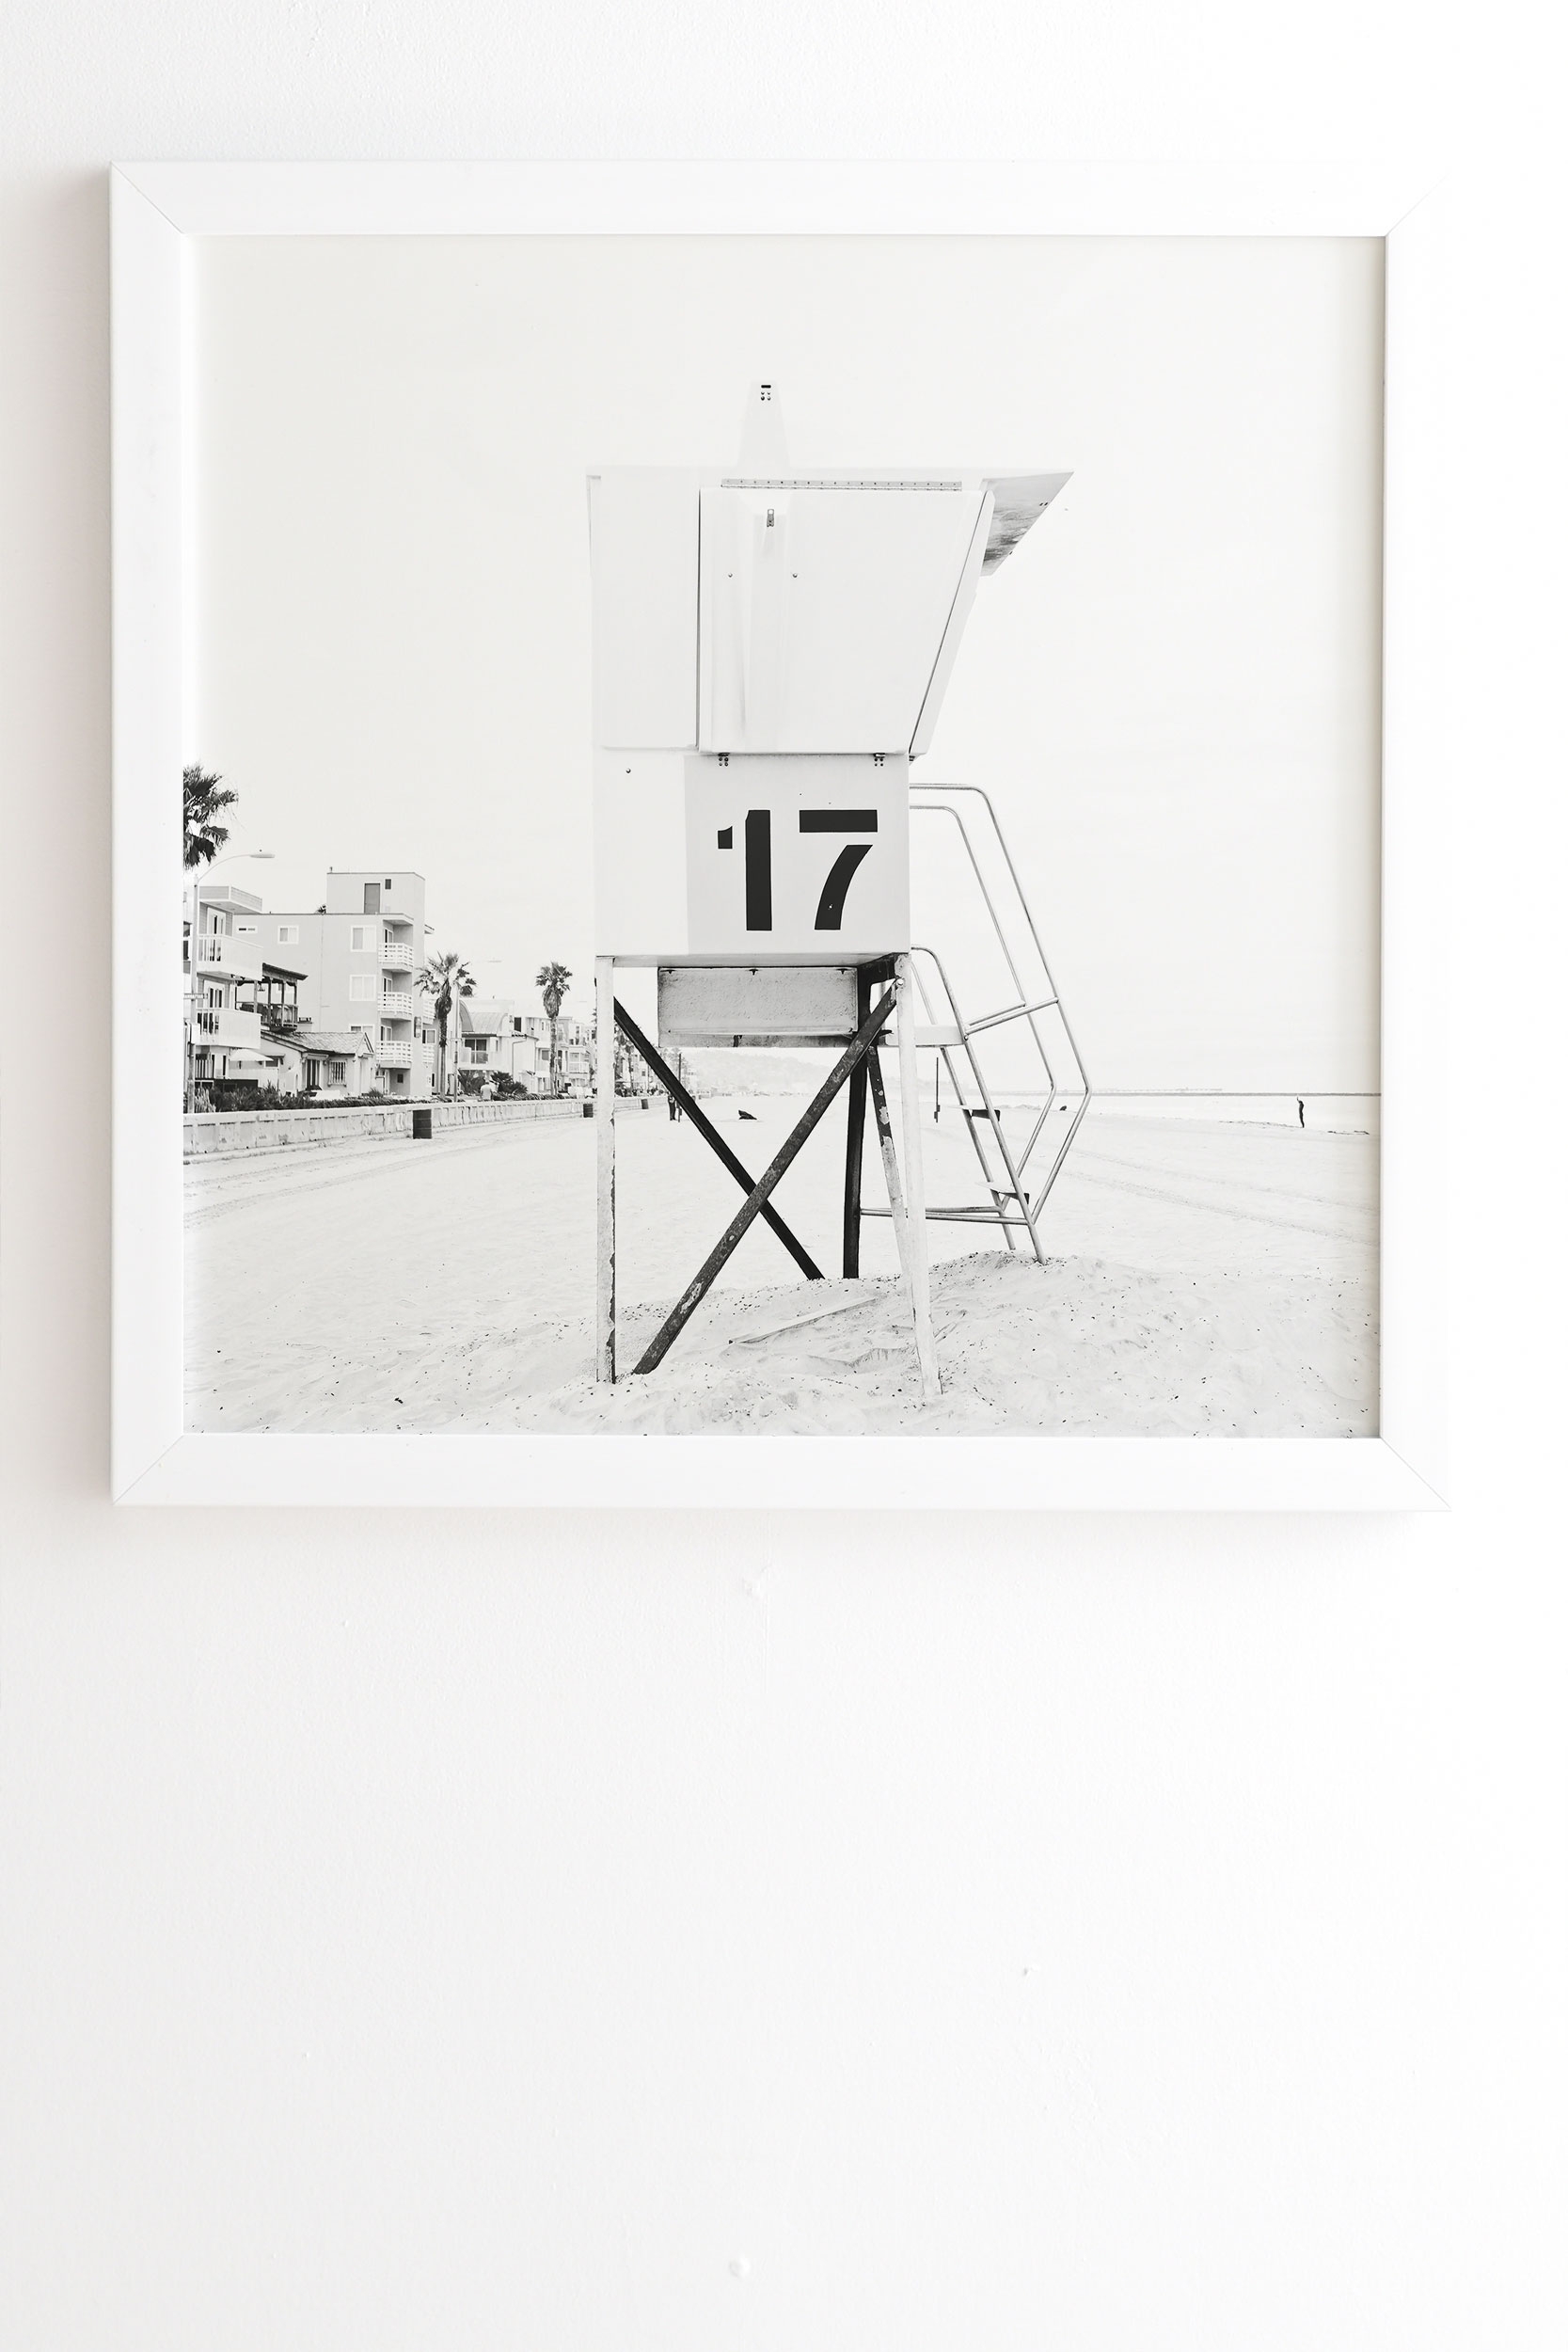 Tower 17 by Bree Madden - Framed Wall Art Basic White 20" x 20" - Image 1